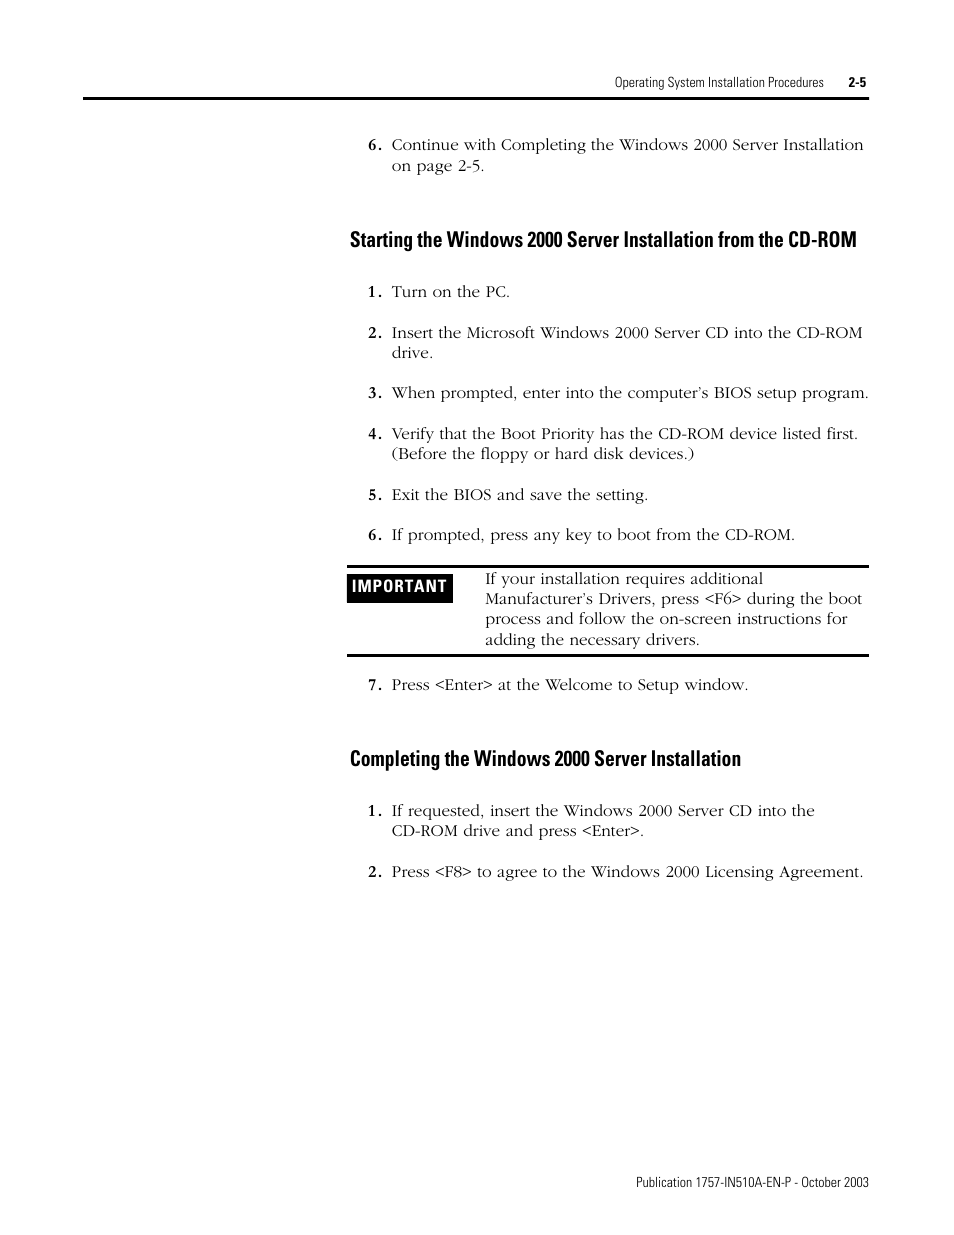 Completing the windows 2000 server installation, Starting the windows 2000 server installation | Rockwell Automation 1757-SWKIT5100 ProcessLogix R510.0 Installation and Upgrade Guide User Manual | Page 25 / 271